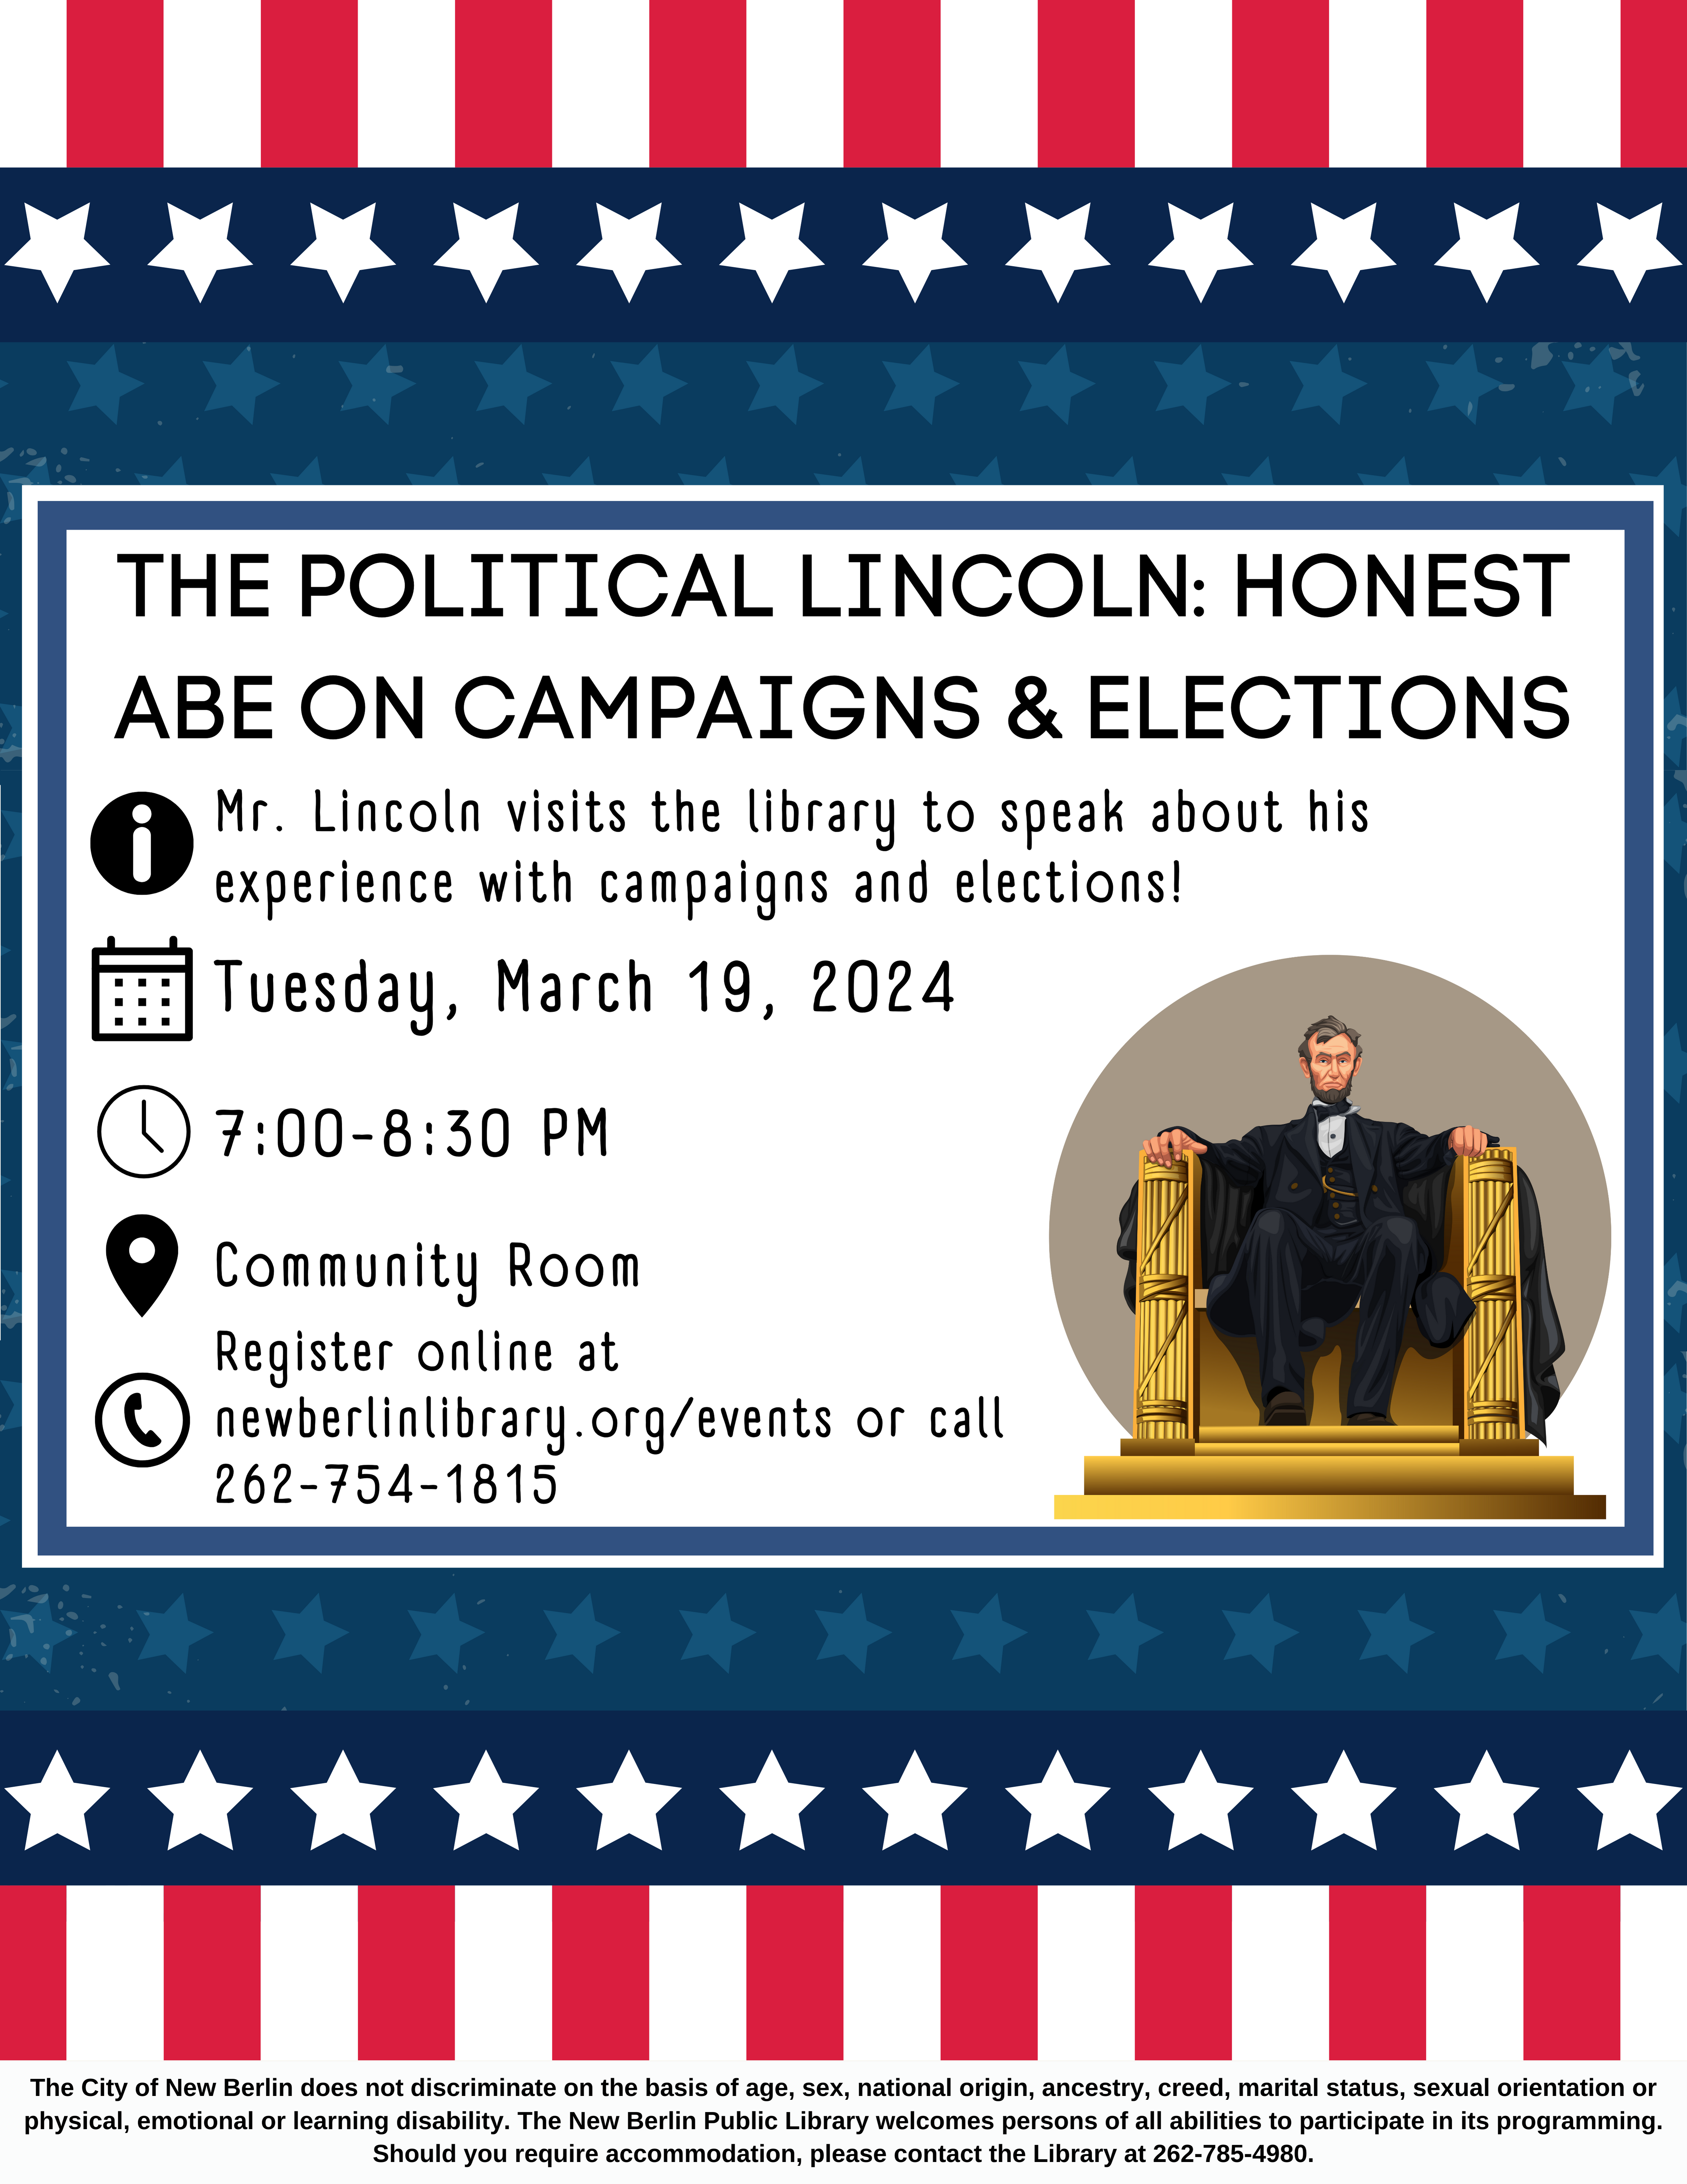 Image of program flyer for "The Political Lincoln" on Tuesday, March 19, 2024 in the NBPL Community Room. Flyer has patriotic decals with an image showing President Abraham Lincoln.